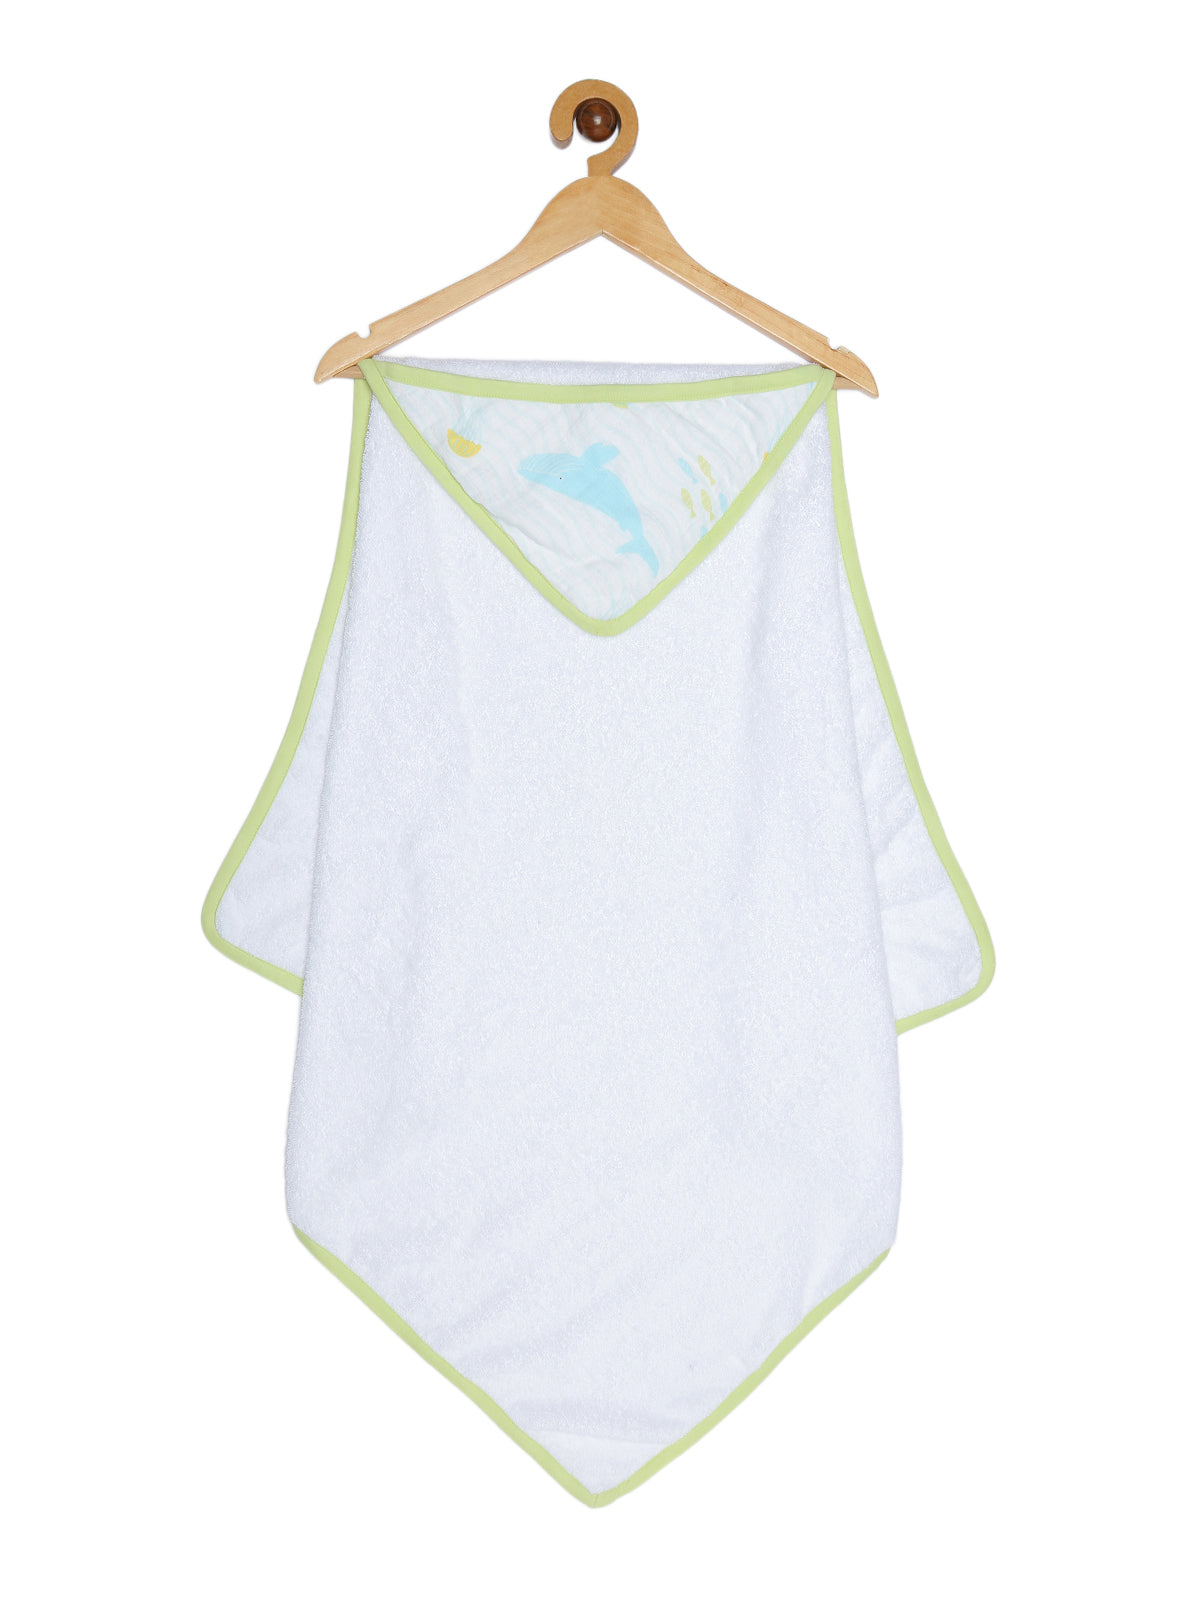 Baby Bathtime Gift Set from Ooka Baby (An Ocean's Lullaby Collection)-Available in 3 Prints